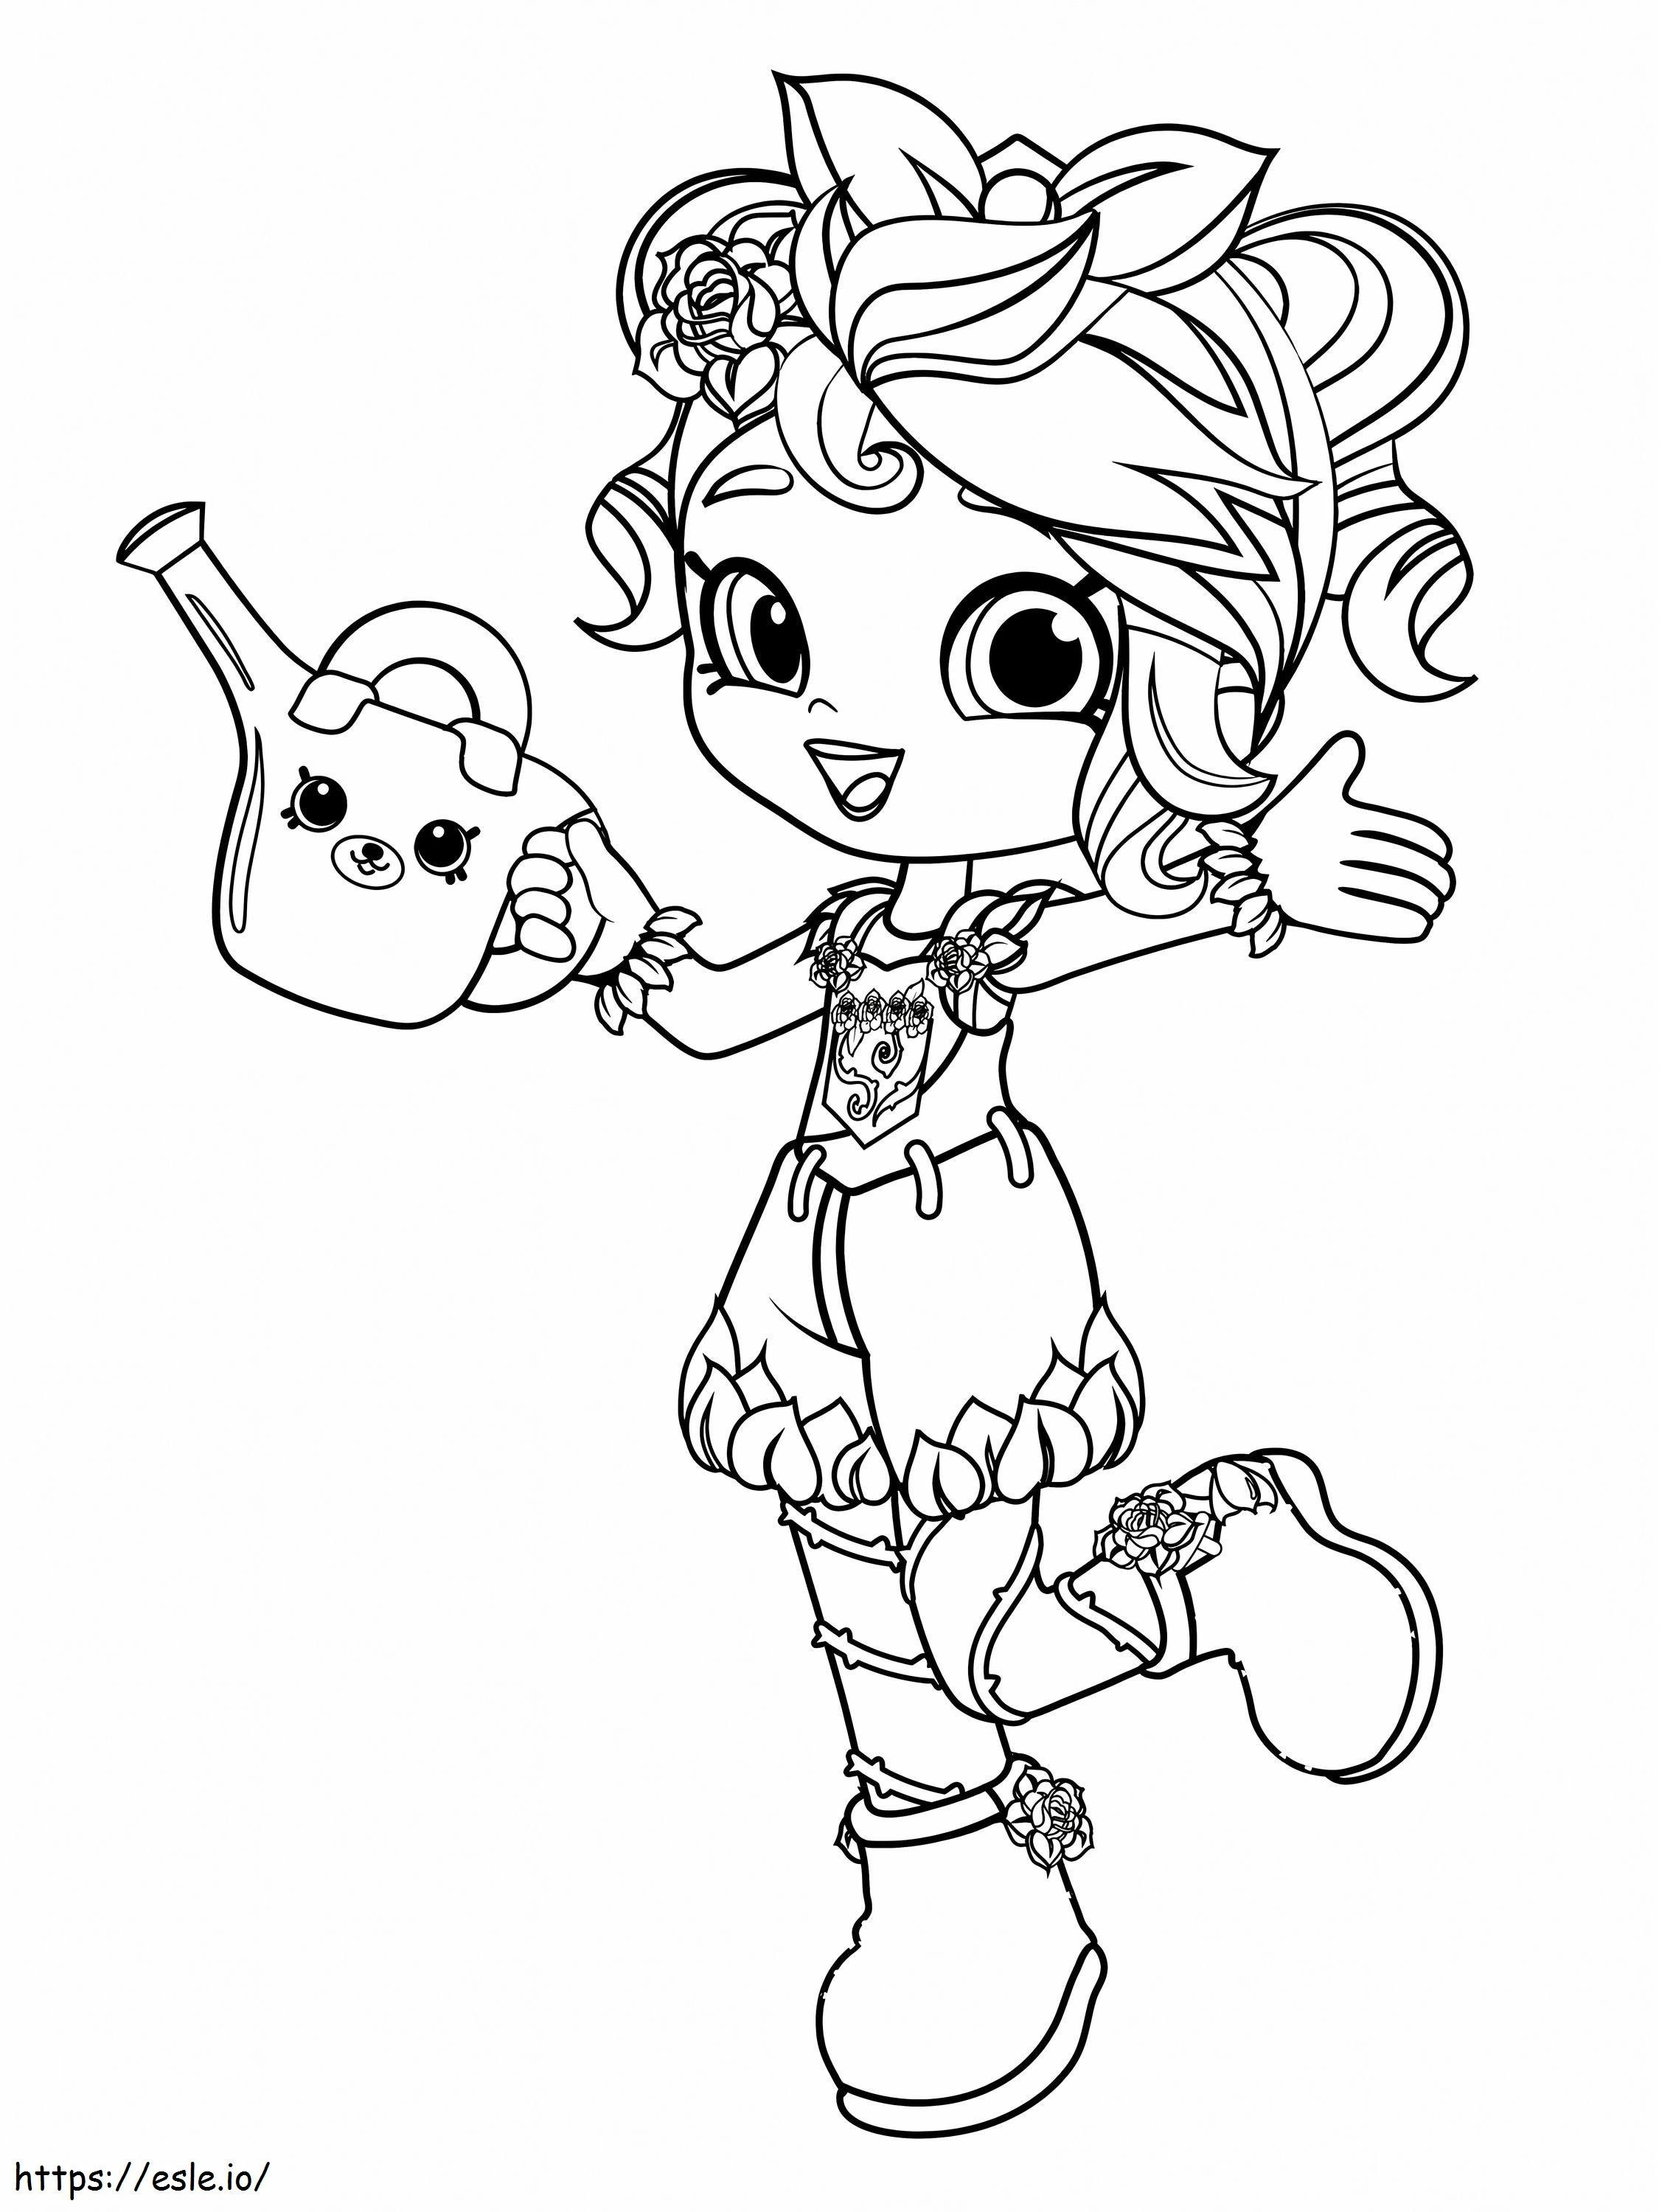 Happy Peppa Mint coloring page